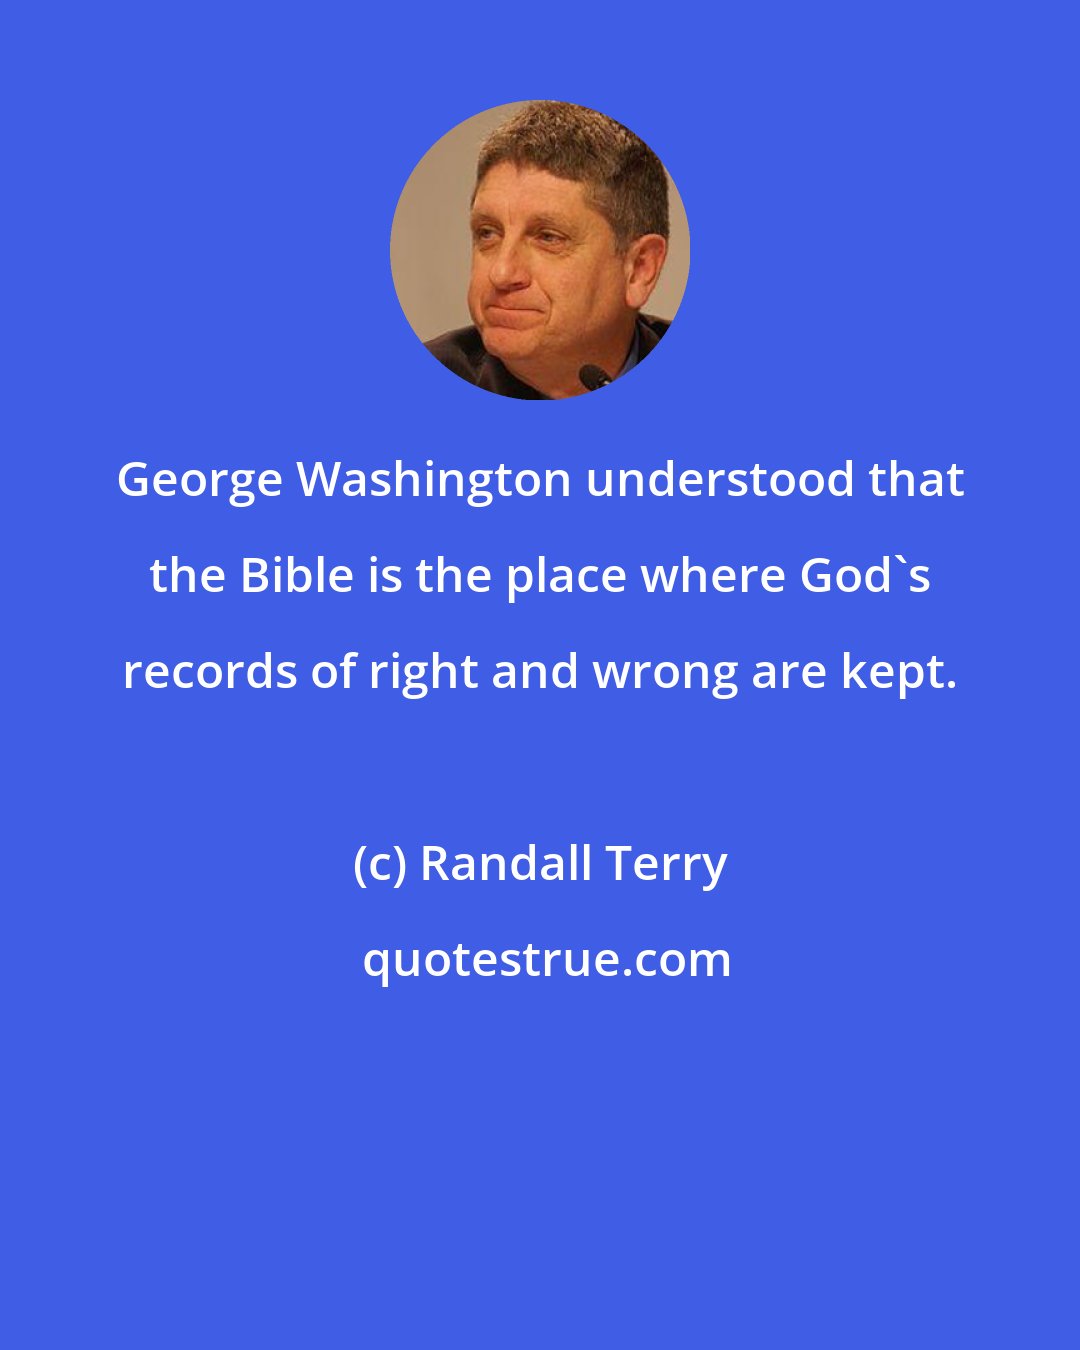 Randall Terry: George Washington understood that the Bible is the place where God's records of right and wrong are kept.